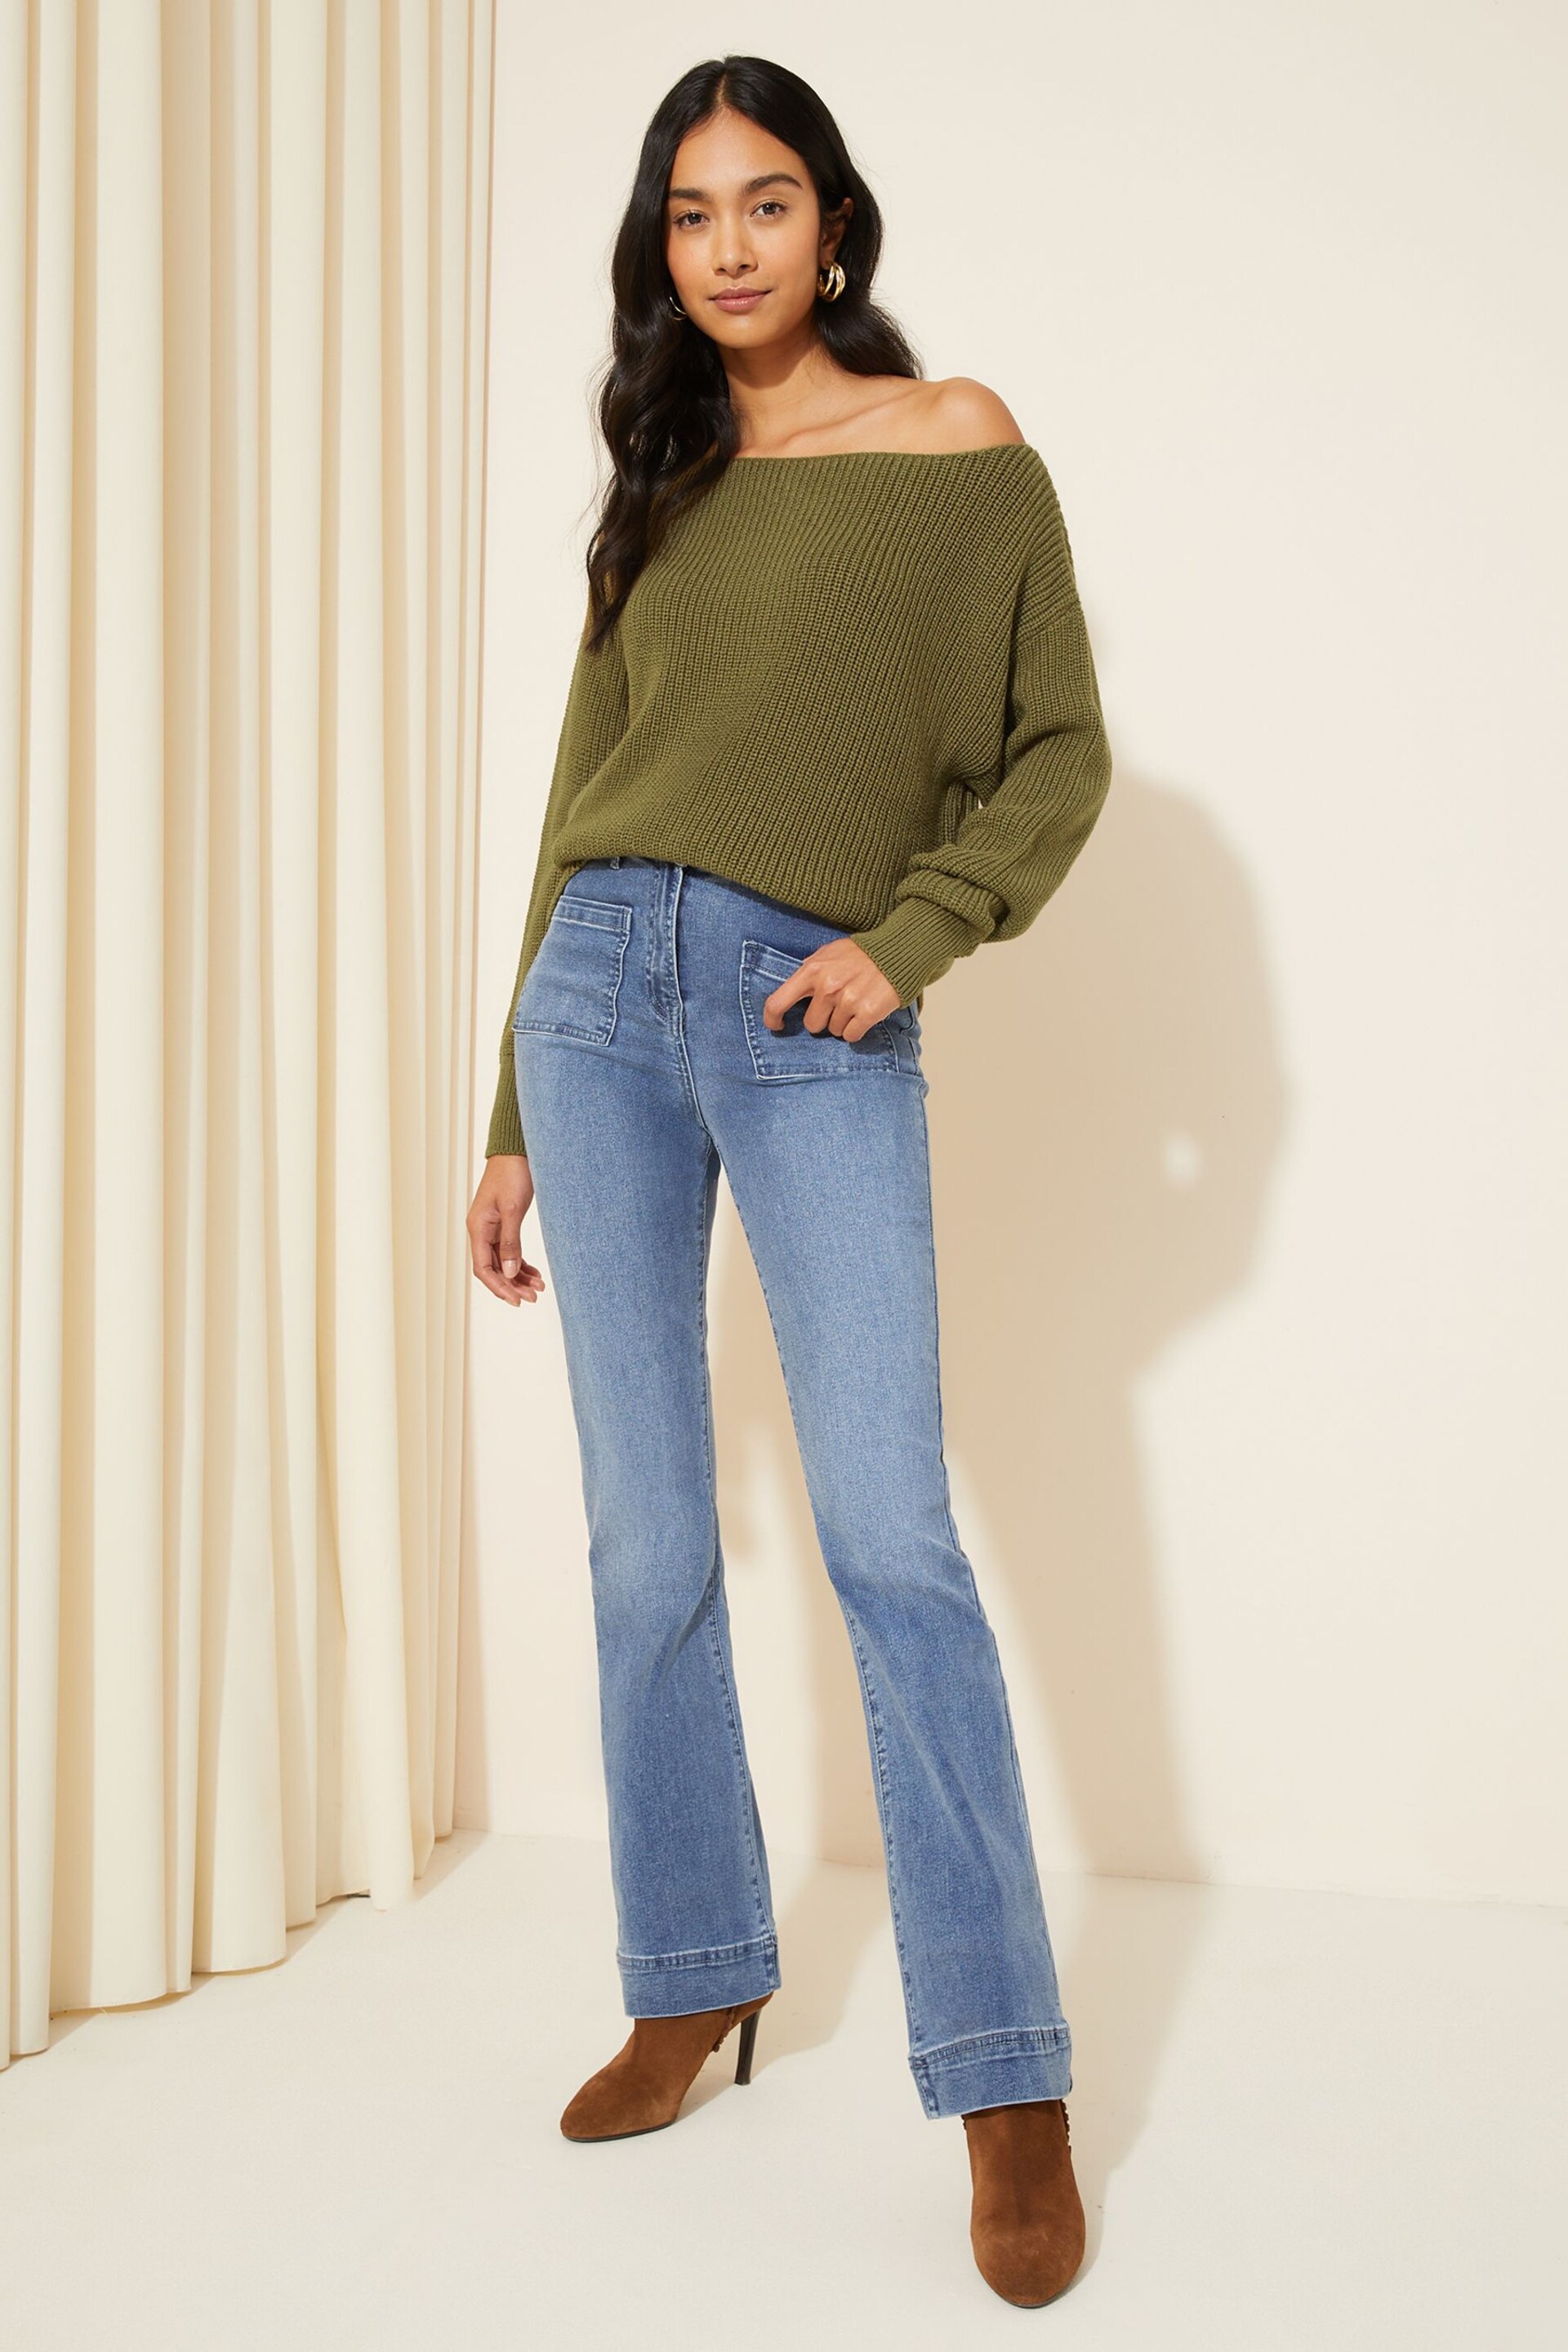 Friends Like These Moss Green Off The Shoulder Jumper - Image 3 of 4